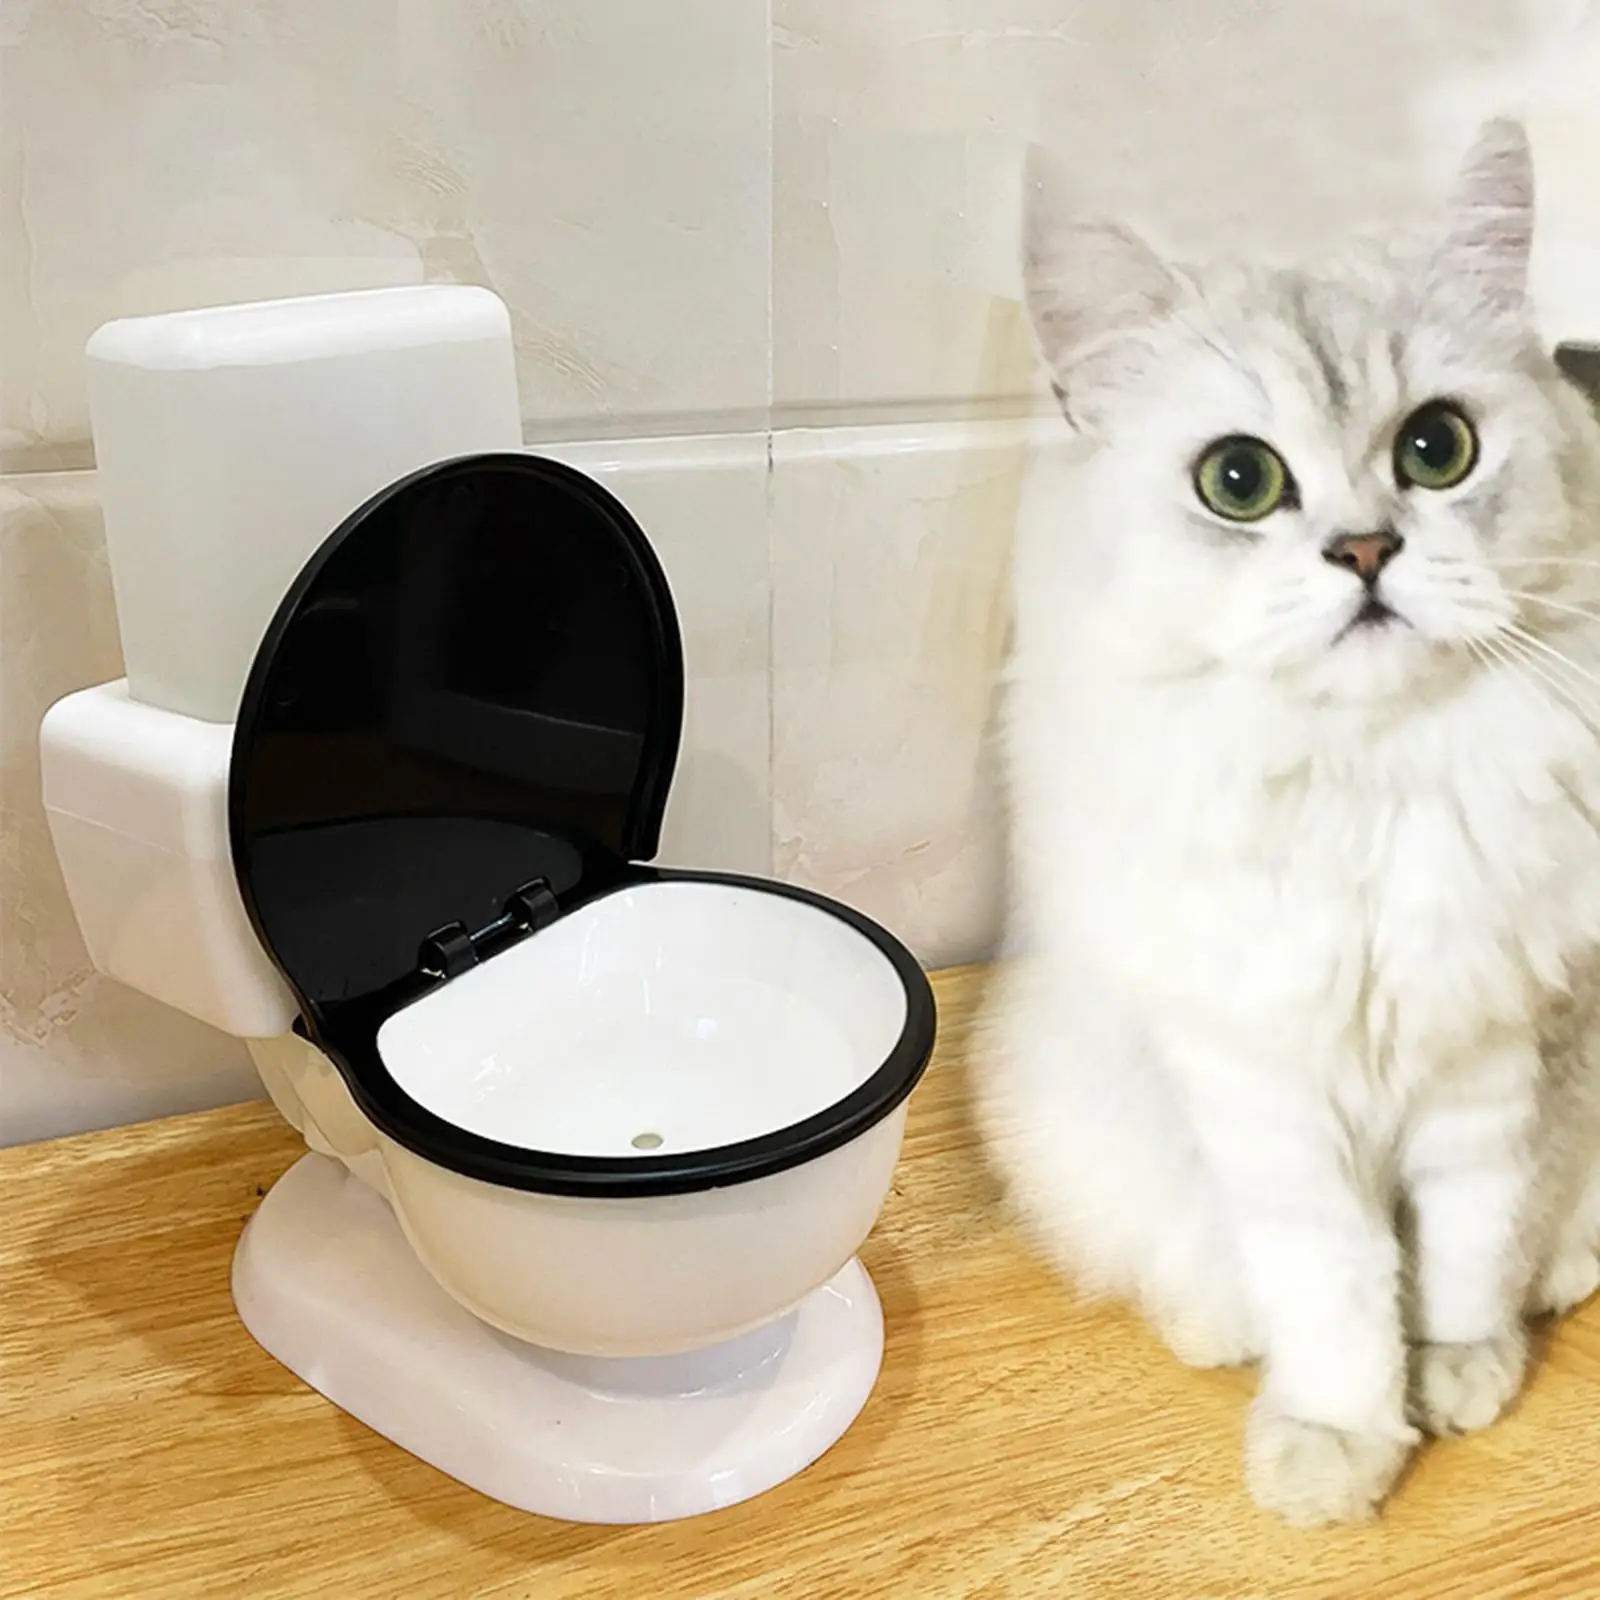 Pet Dog Cat Waterer Water Bowl Gravity Feeder Funny Toilet Shape Detachable Automatic Water Drinking Dispenser Water Fountain